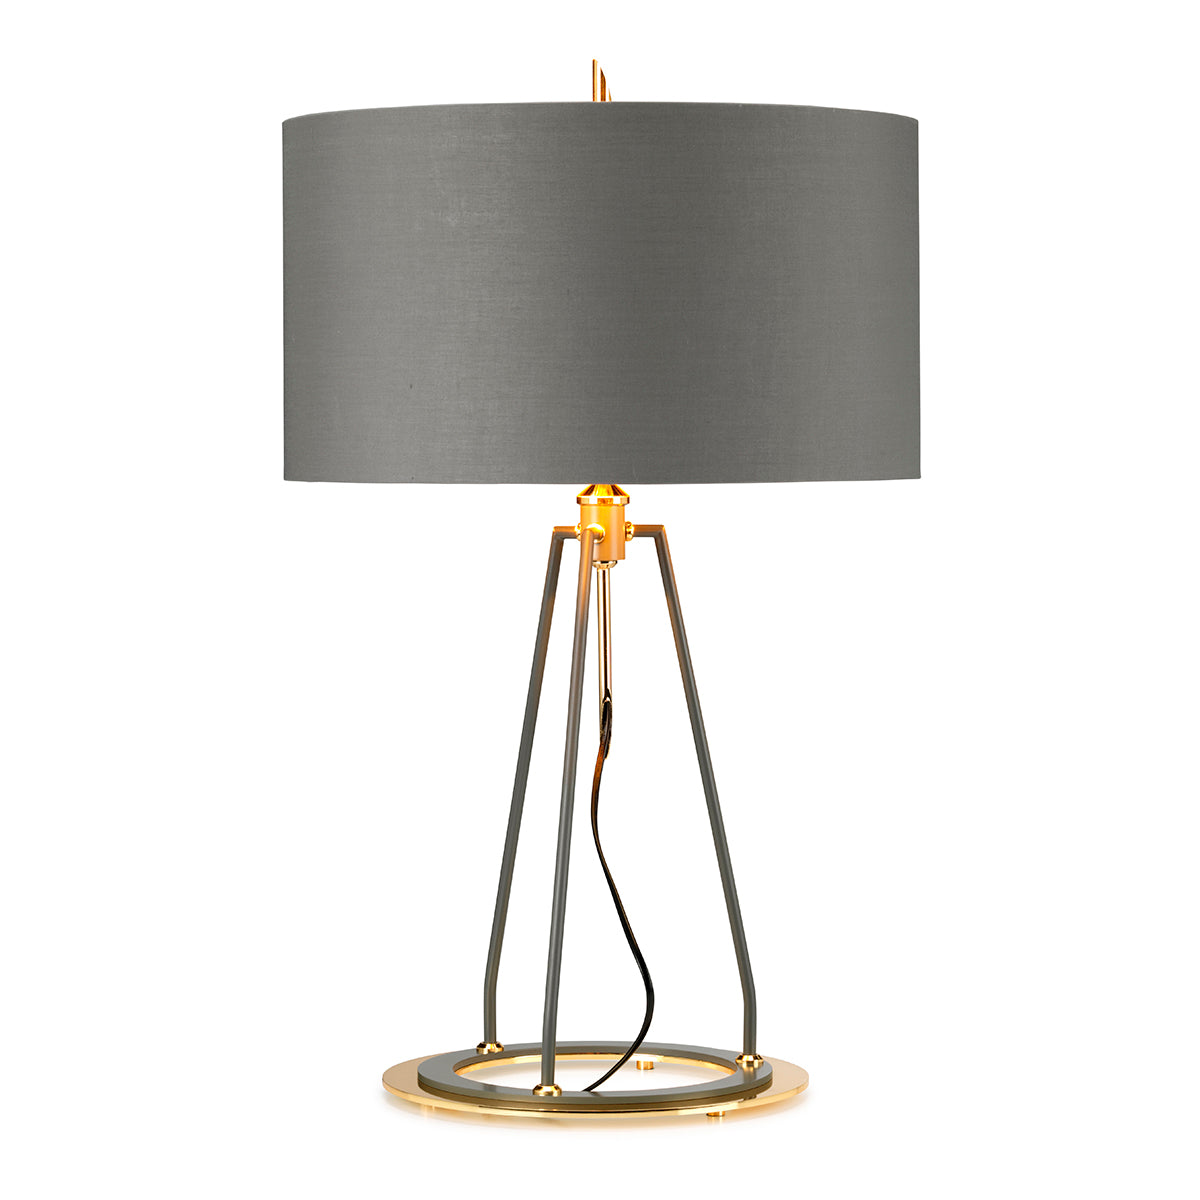 Ferrara Table Lamp - Grey and Polished Gold